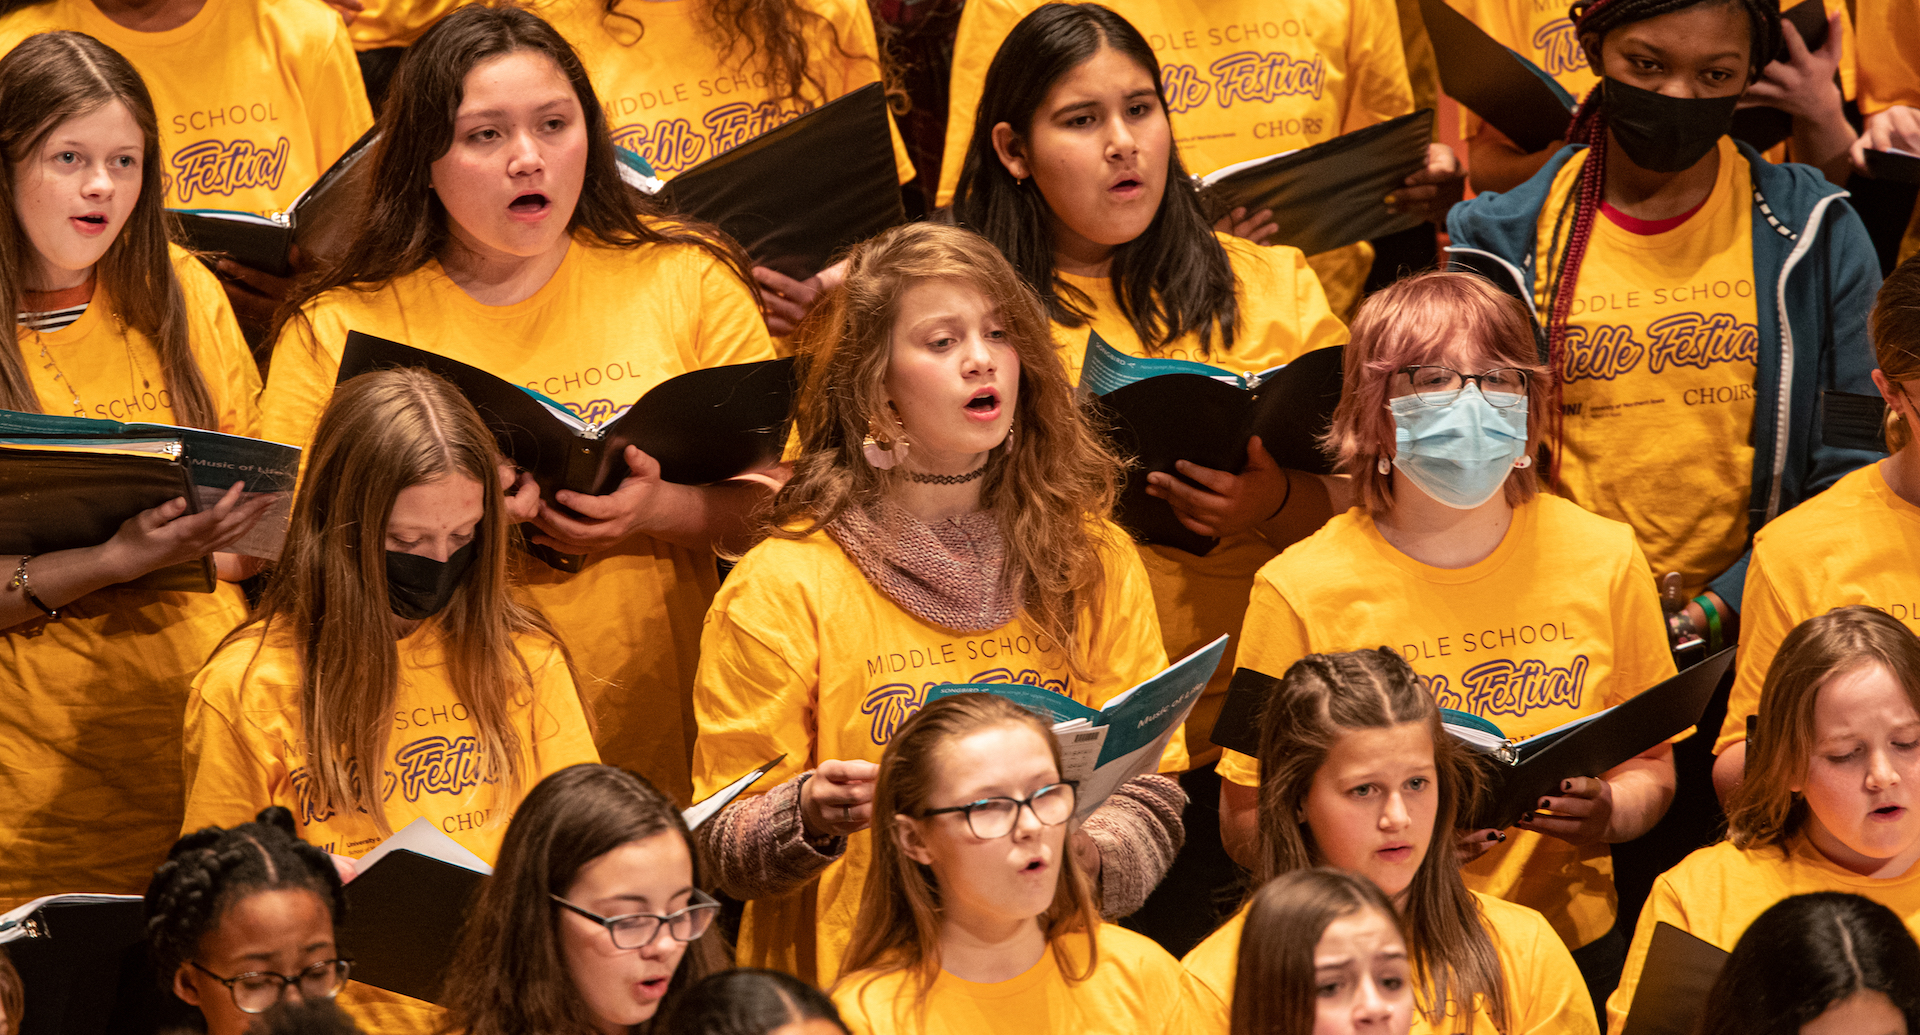 Middle school girls singing at the Treble Festival